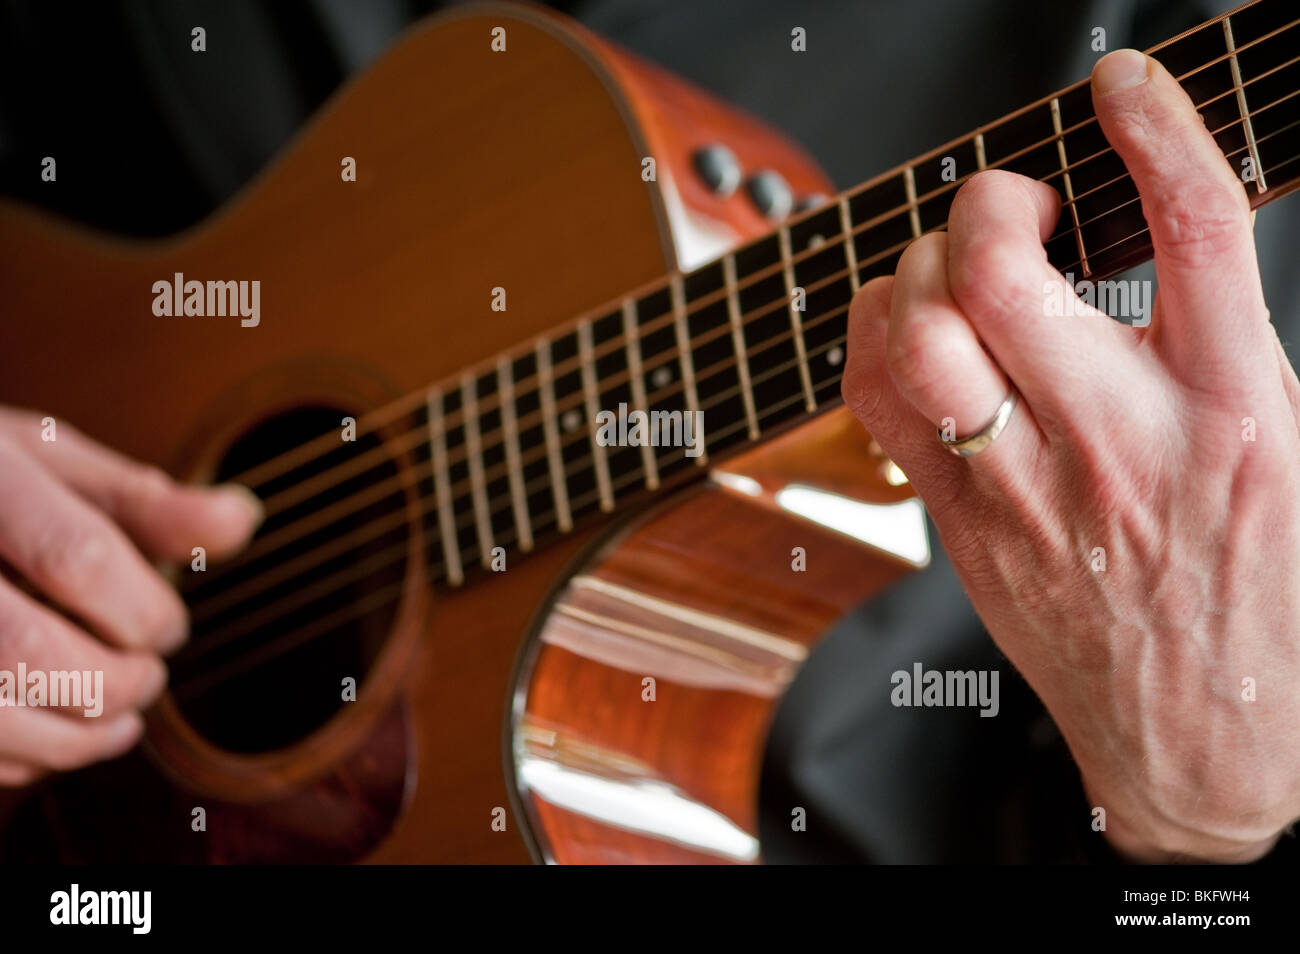 A close up view of hands playing a guitar Stock Photo